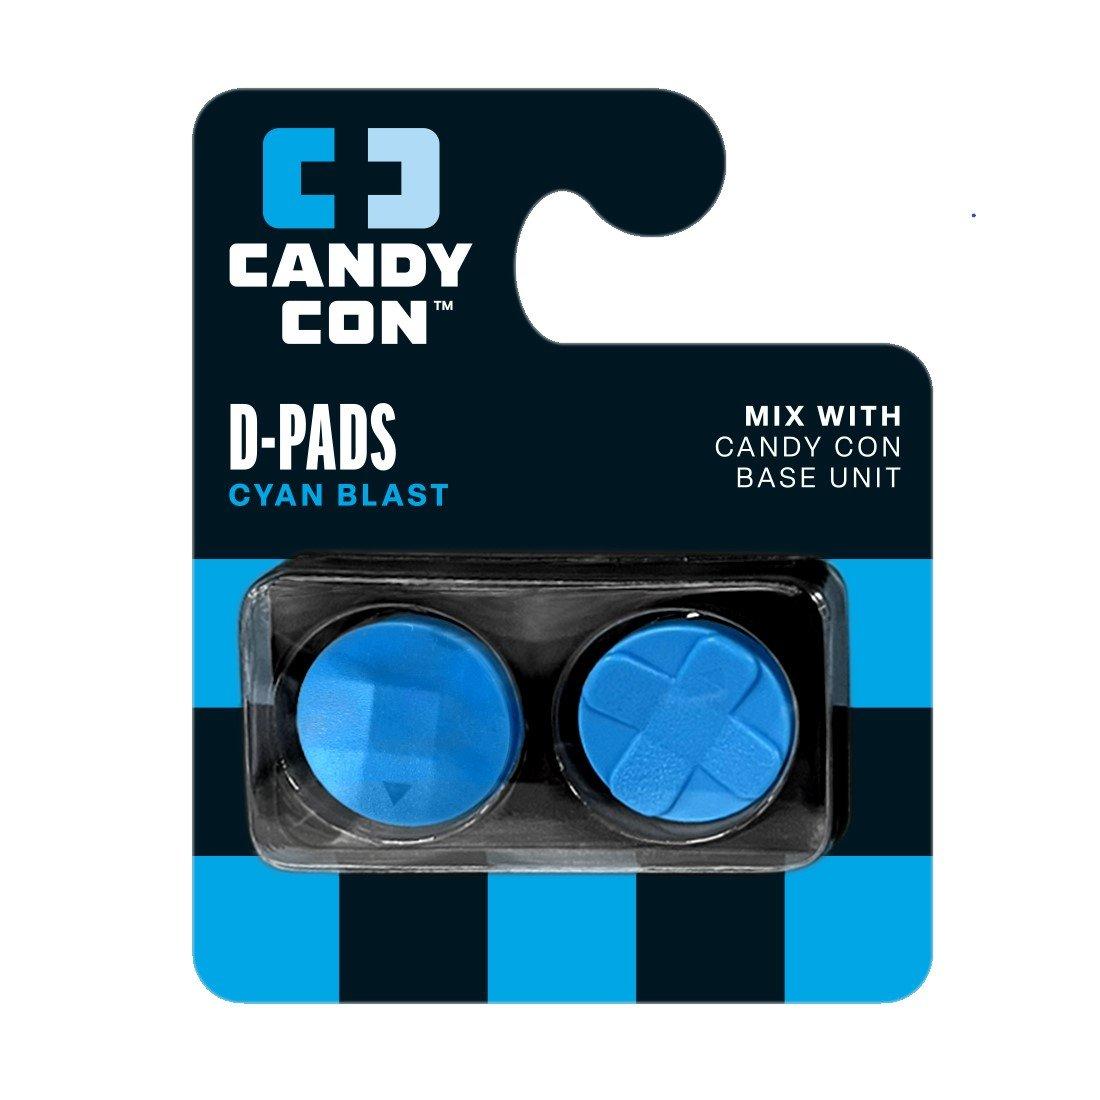 CANDY CON D-Pad for Candy Con Controllers Cyan Blast